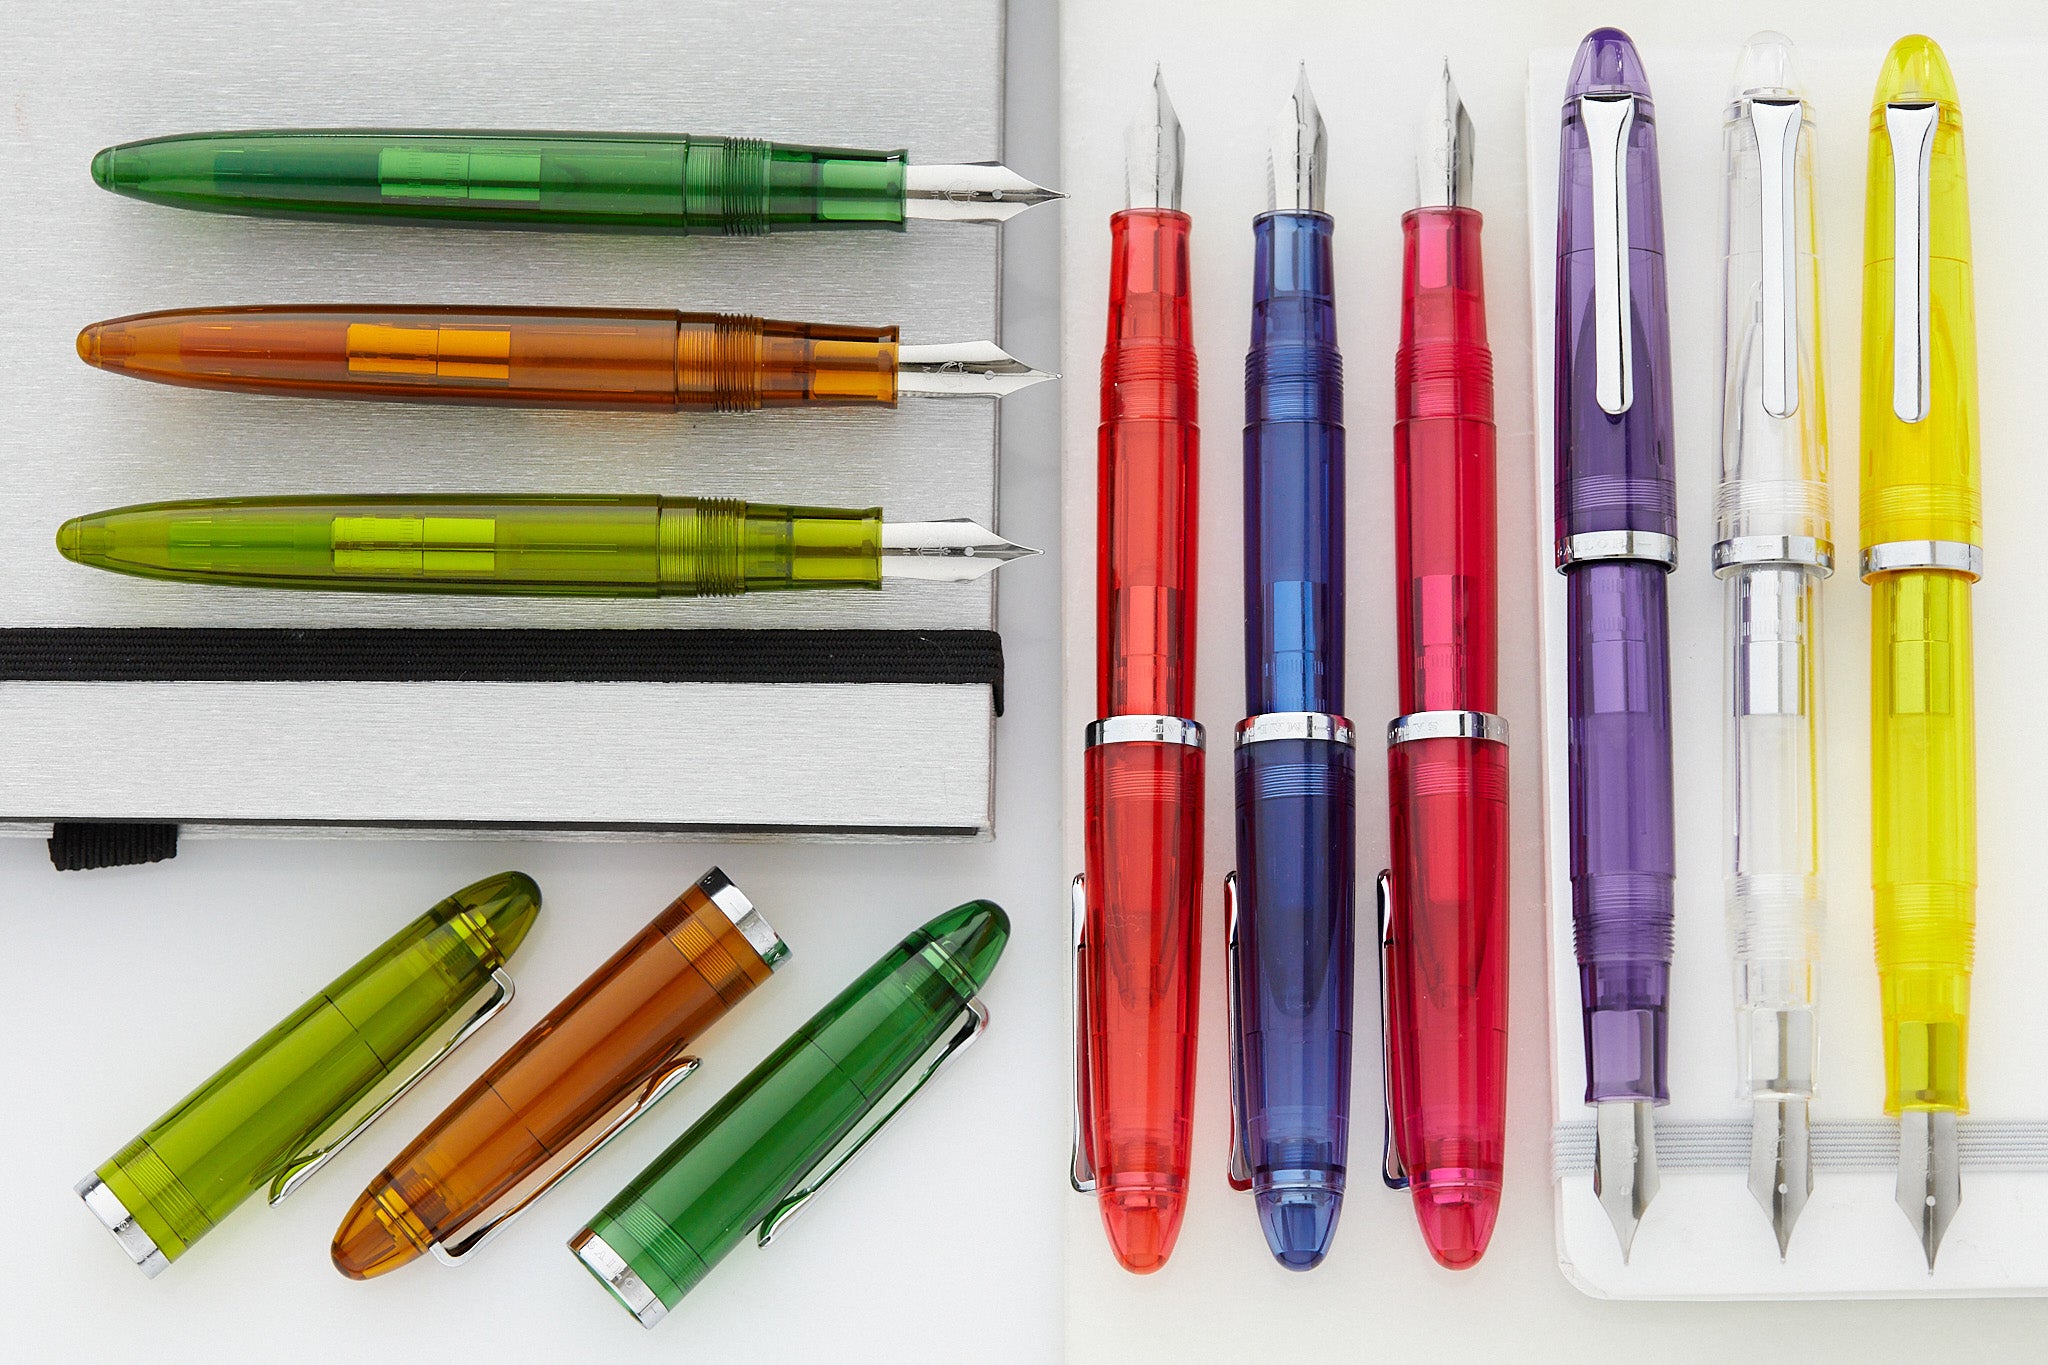 A rainbow of Sailor translucent fountain pens lined up neatly